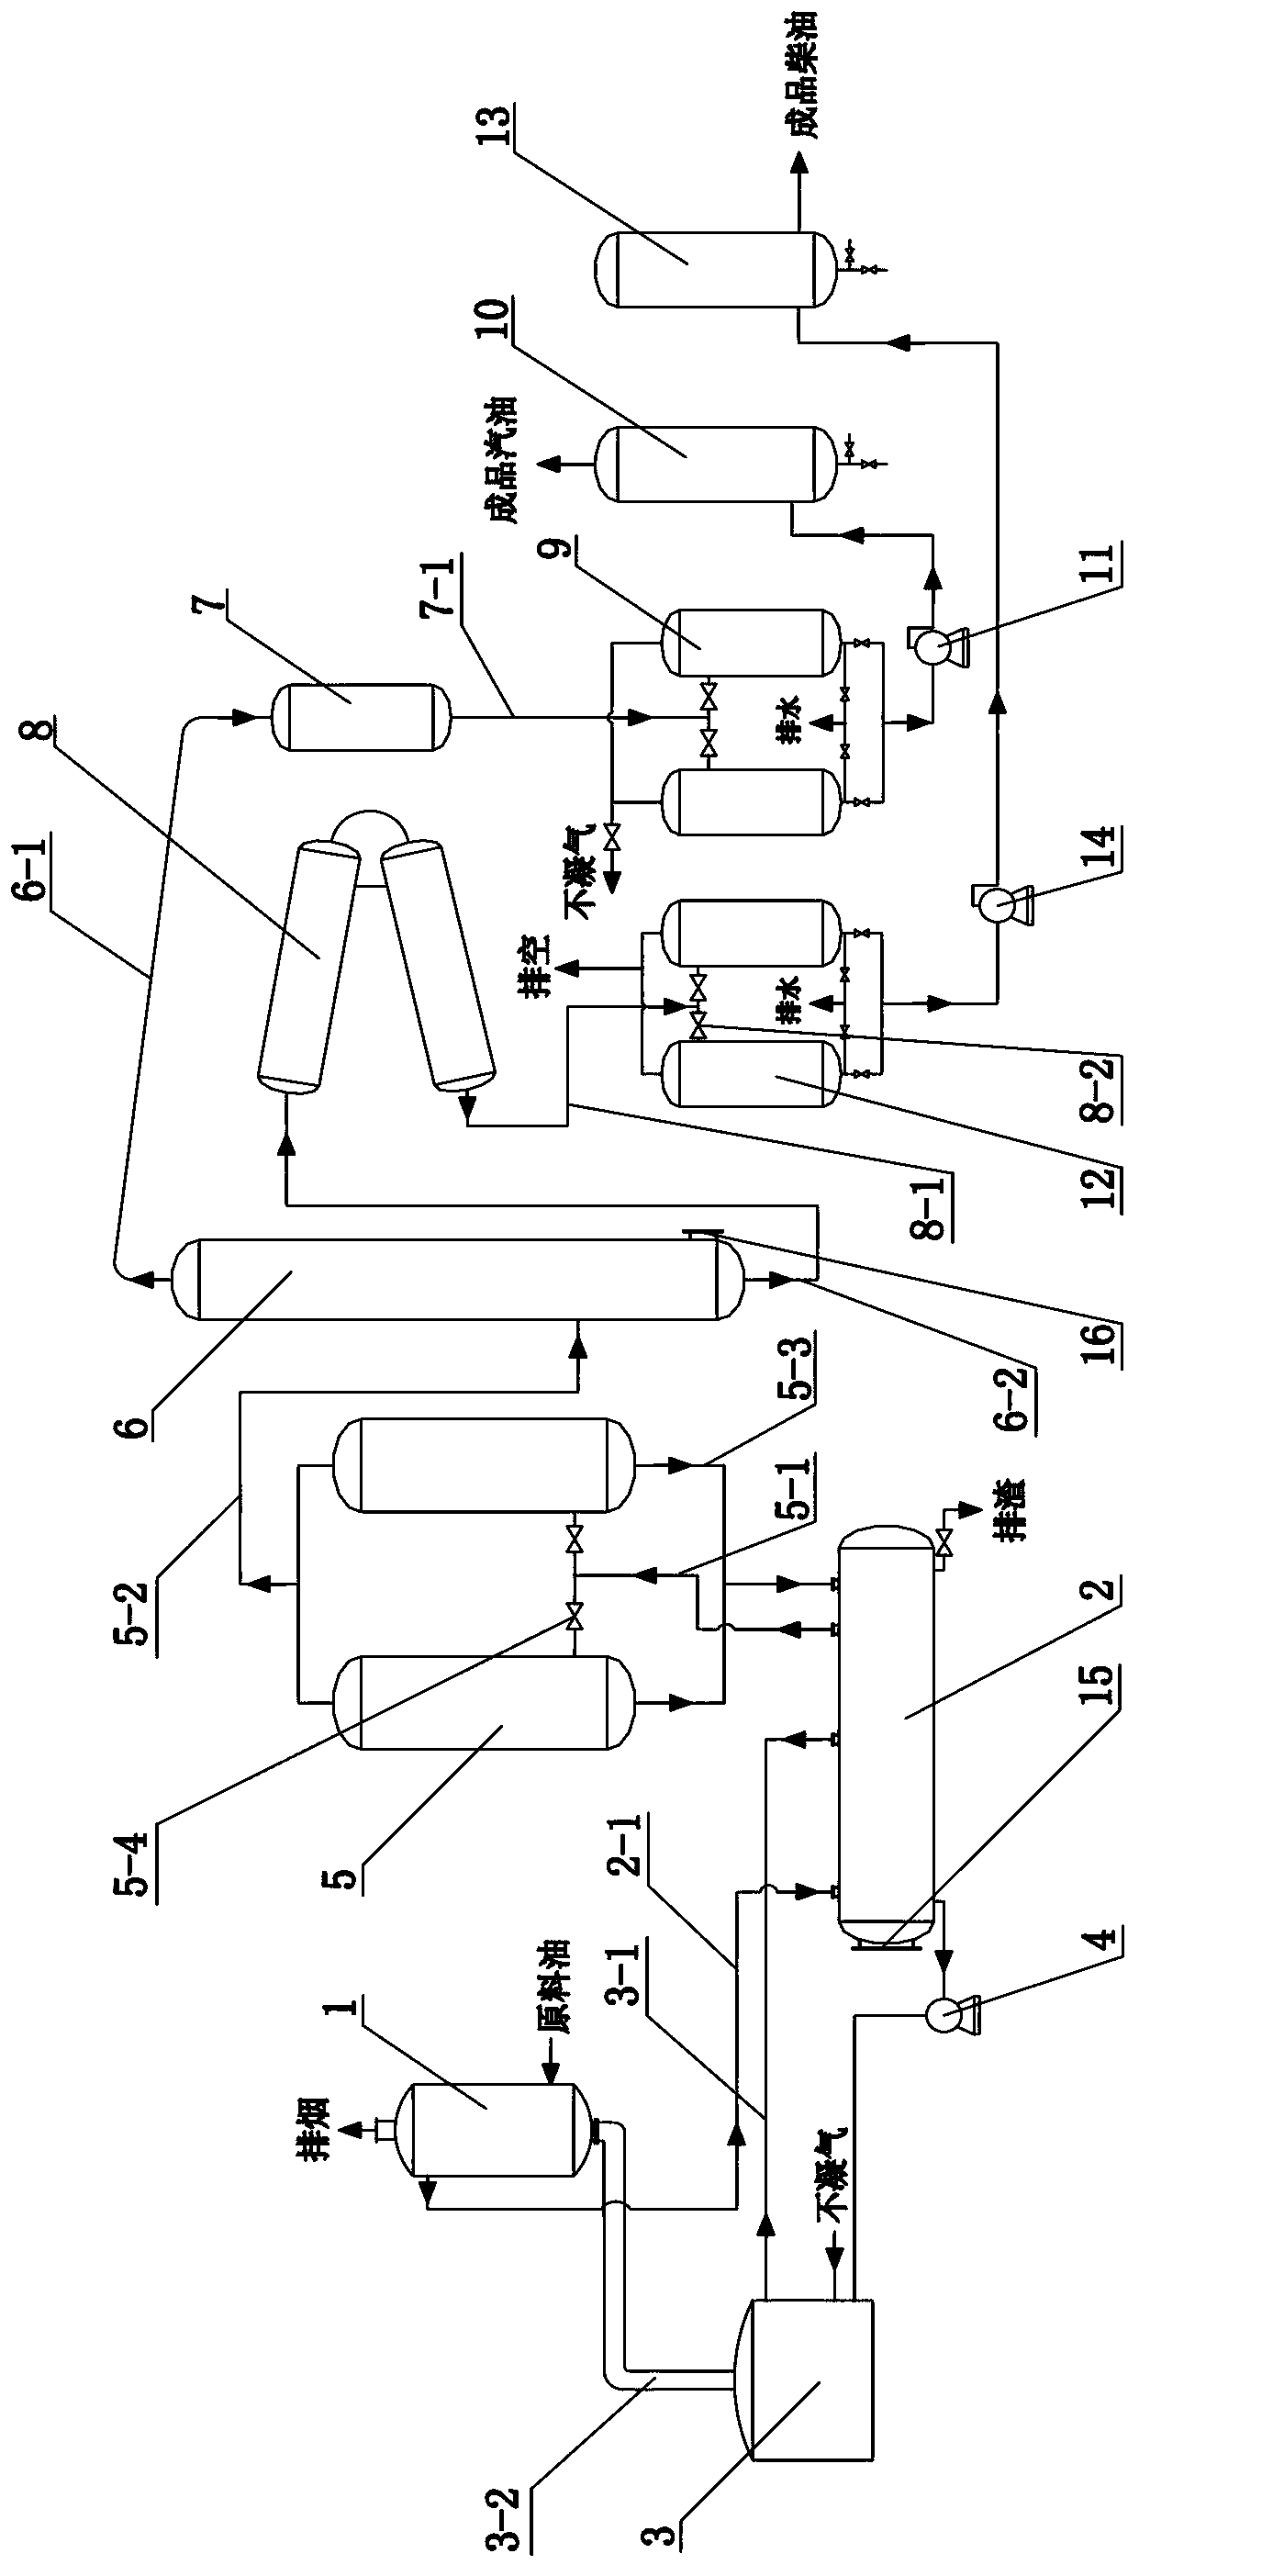 Method and equipment for producing automotive diesel fuel from medium temperature coal tar light oil as raw material